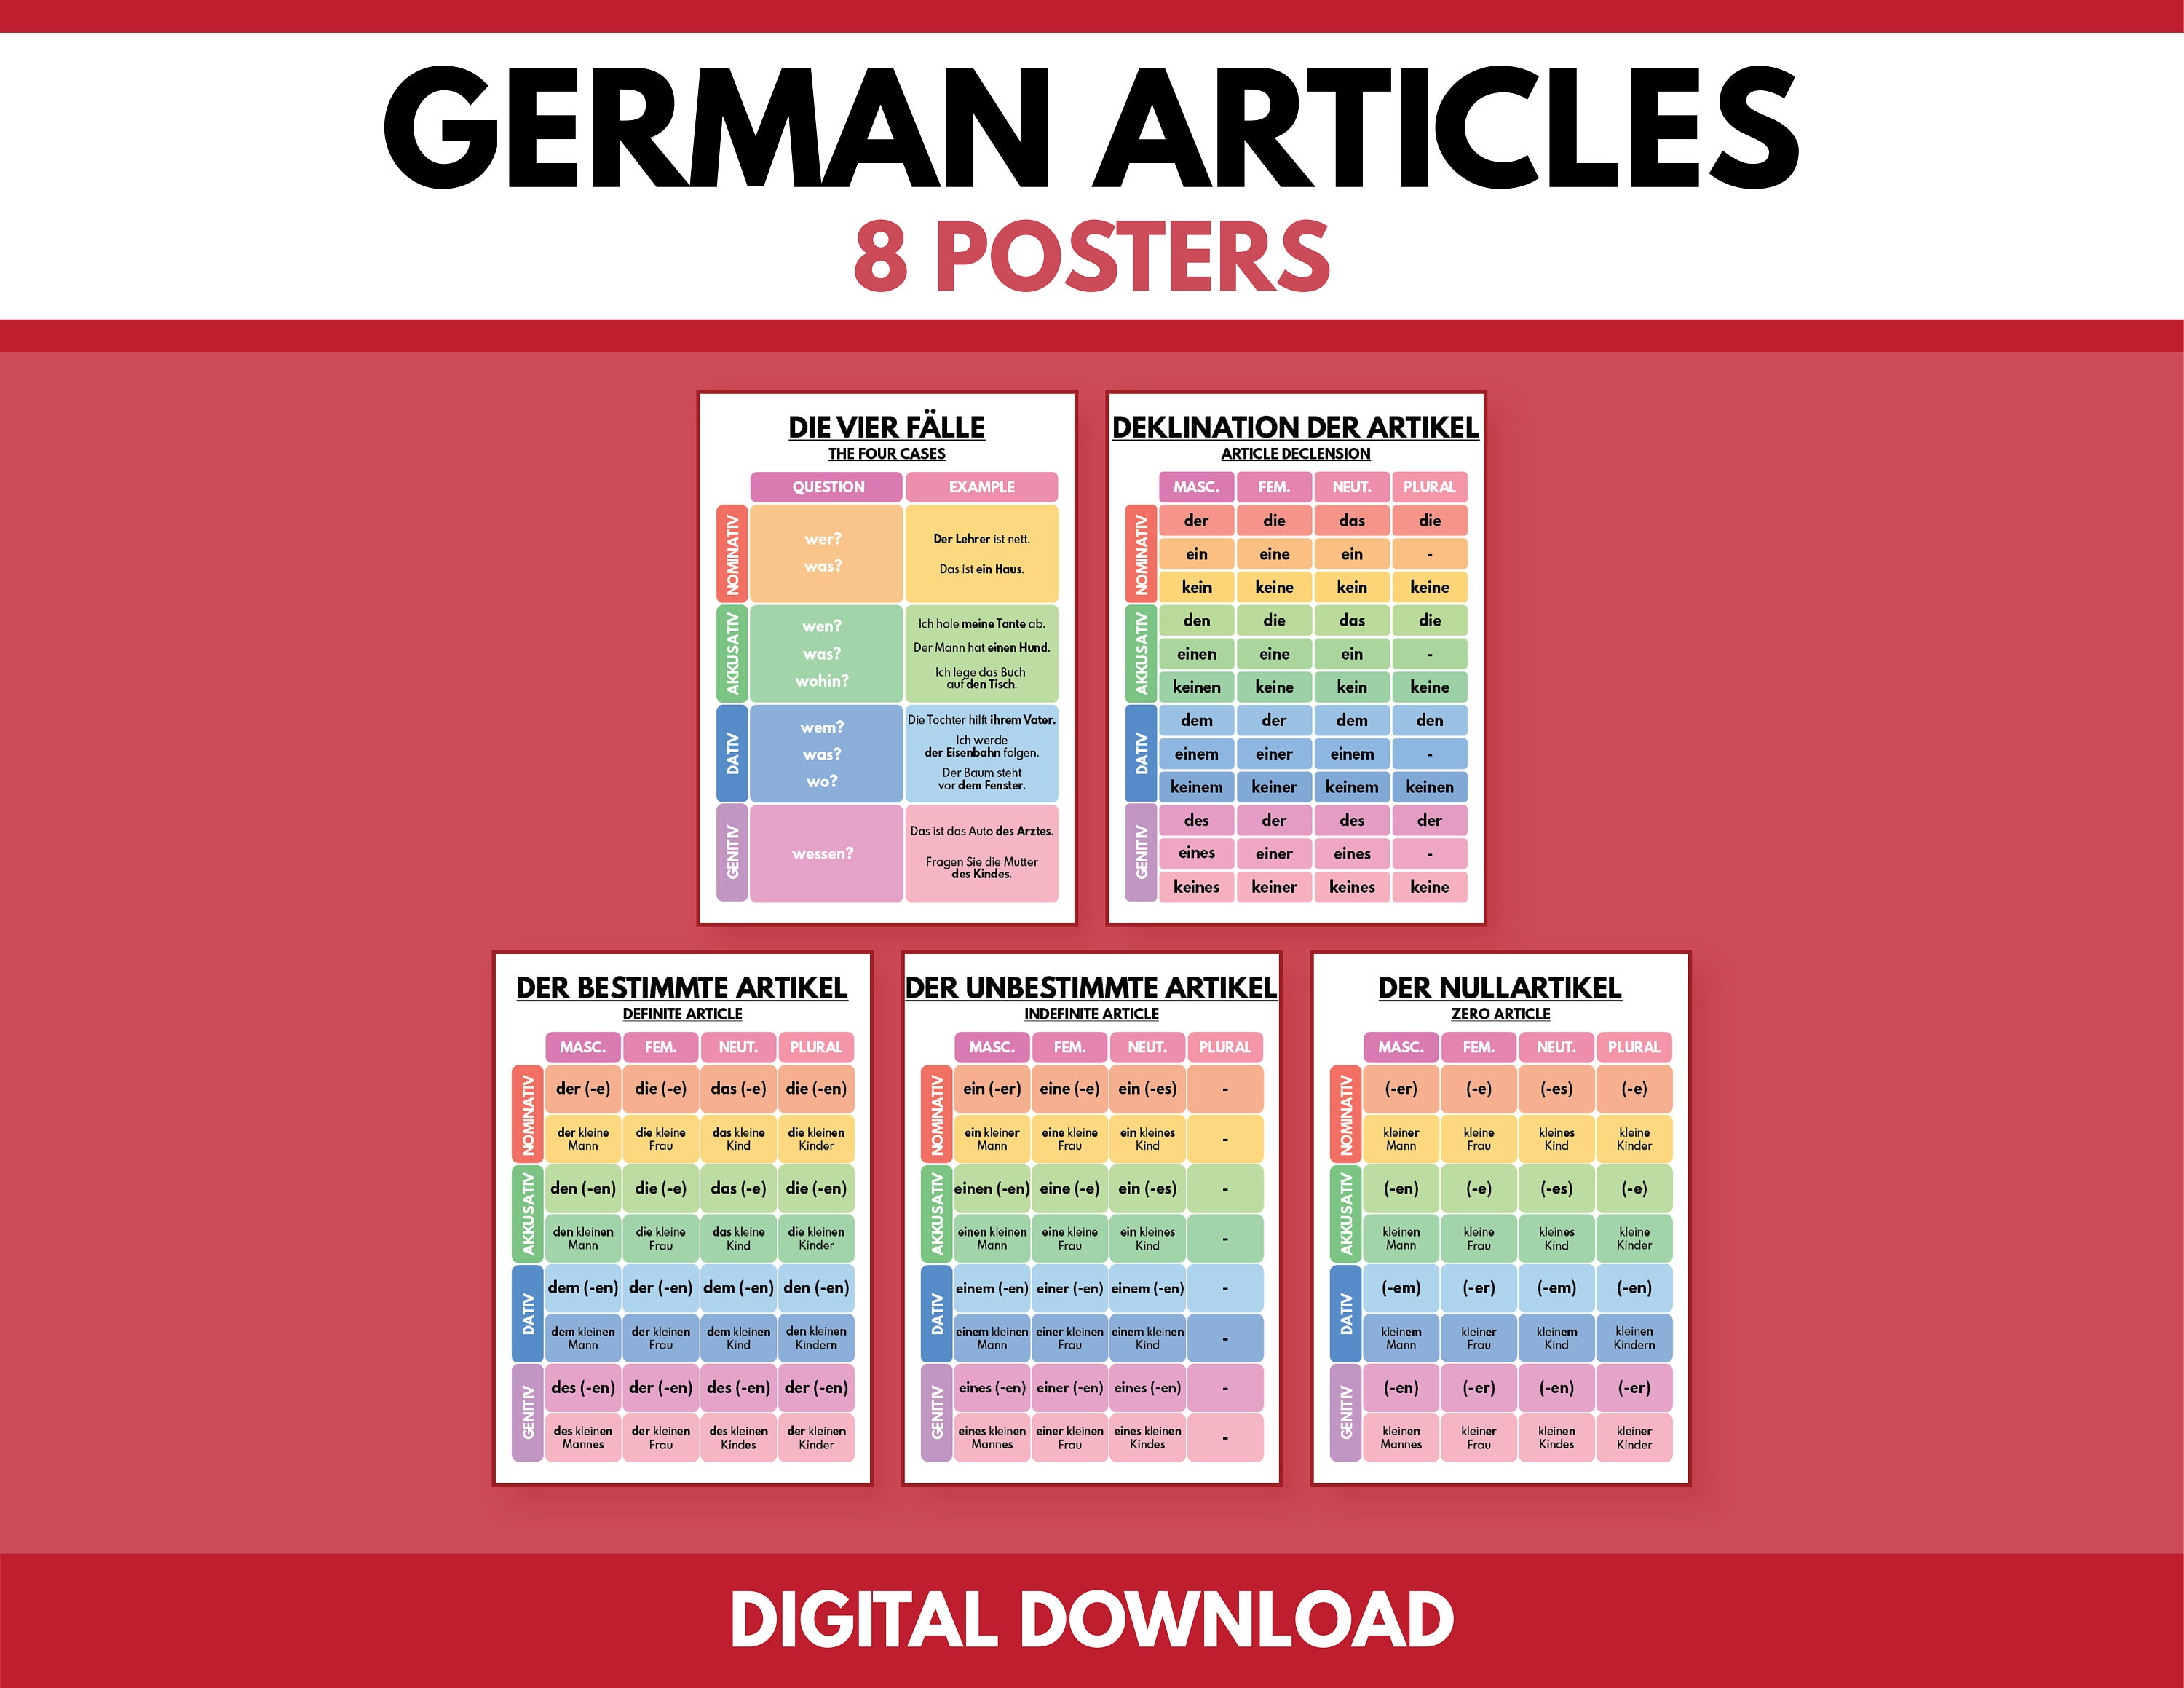 Declension German Slawe - All cases of the noun, plural, article